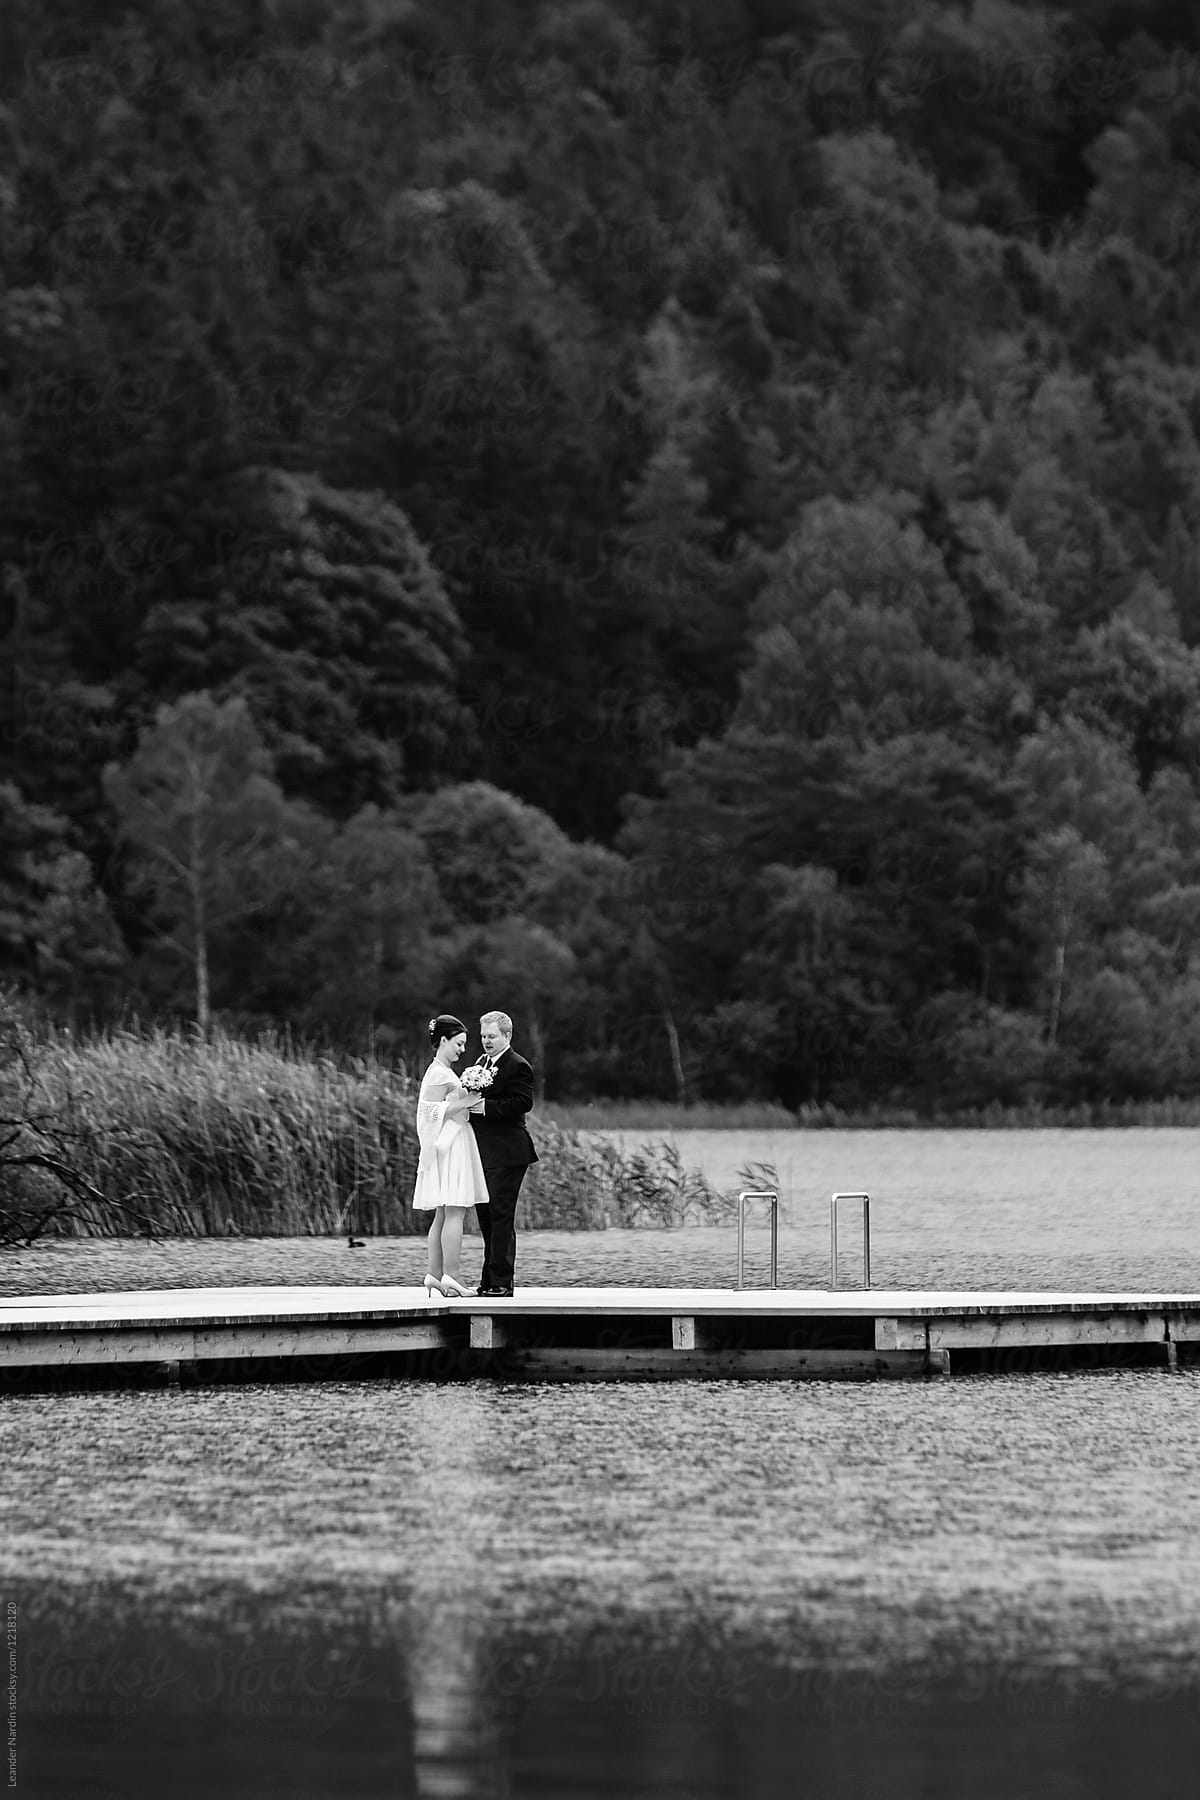 bridal couple standing on a jetty - black and white